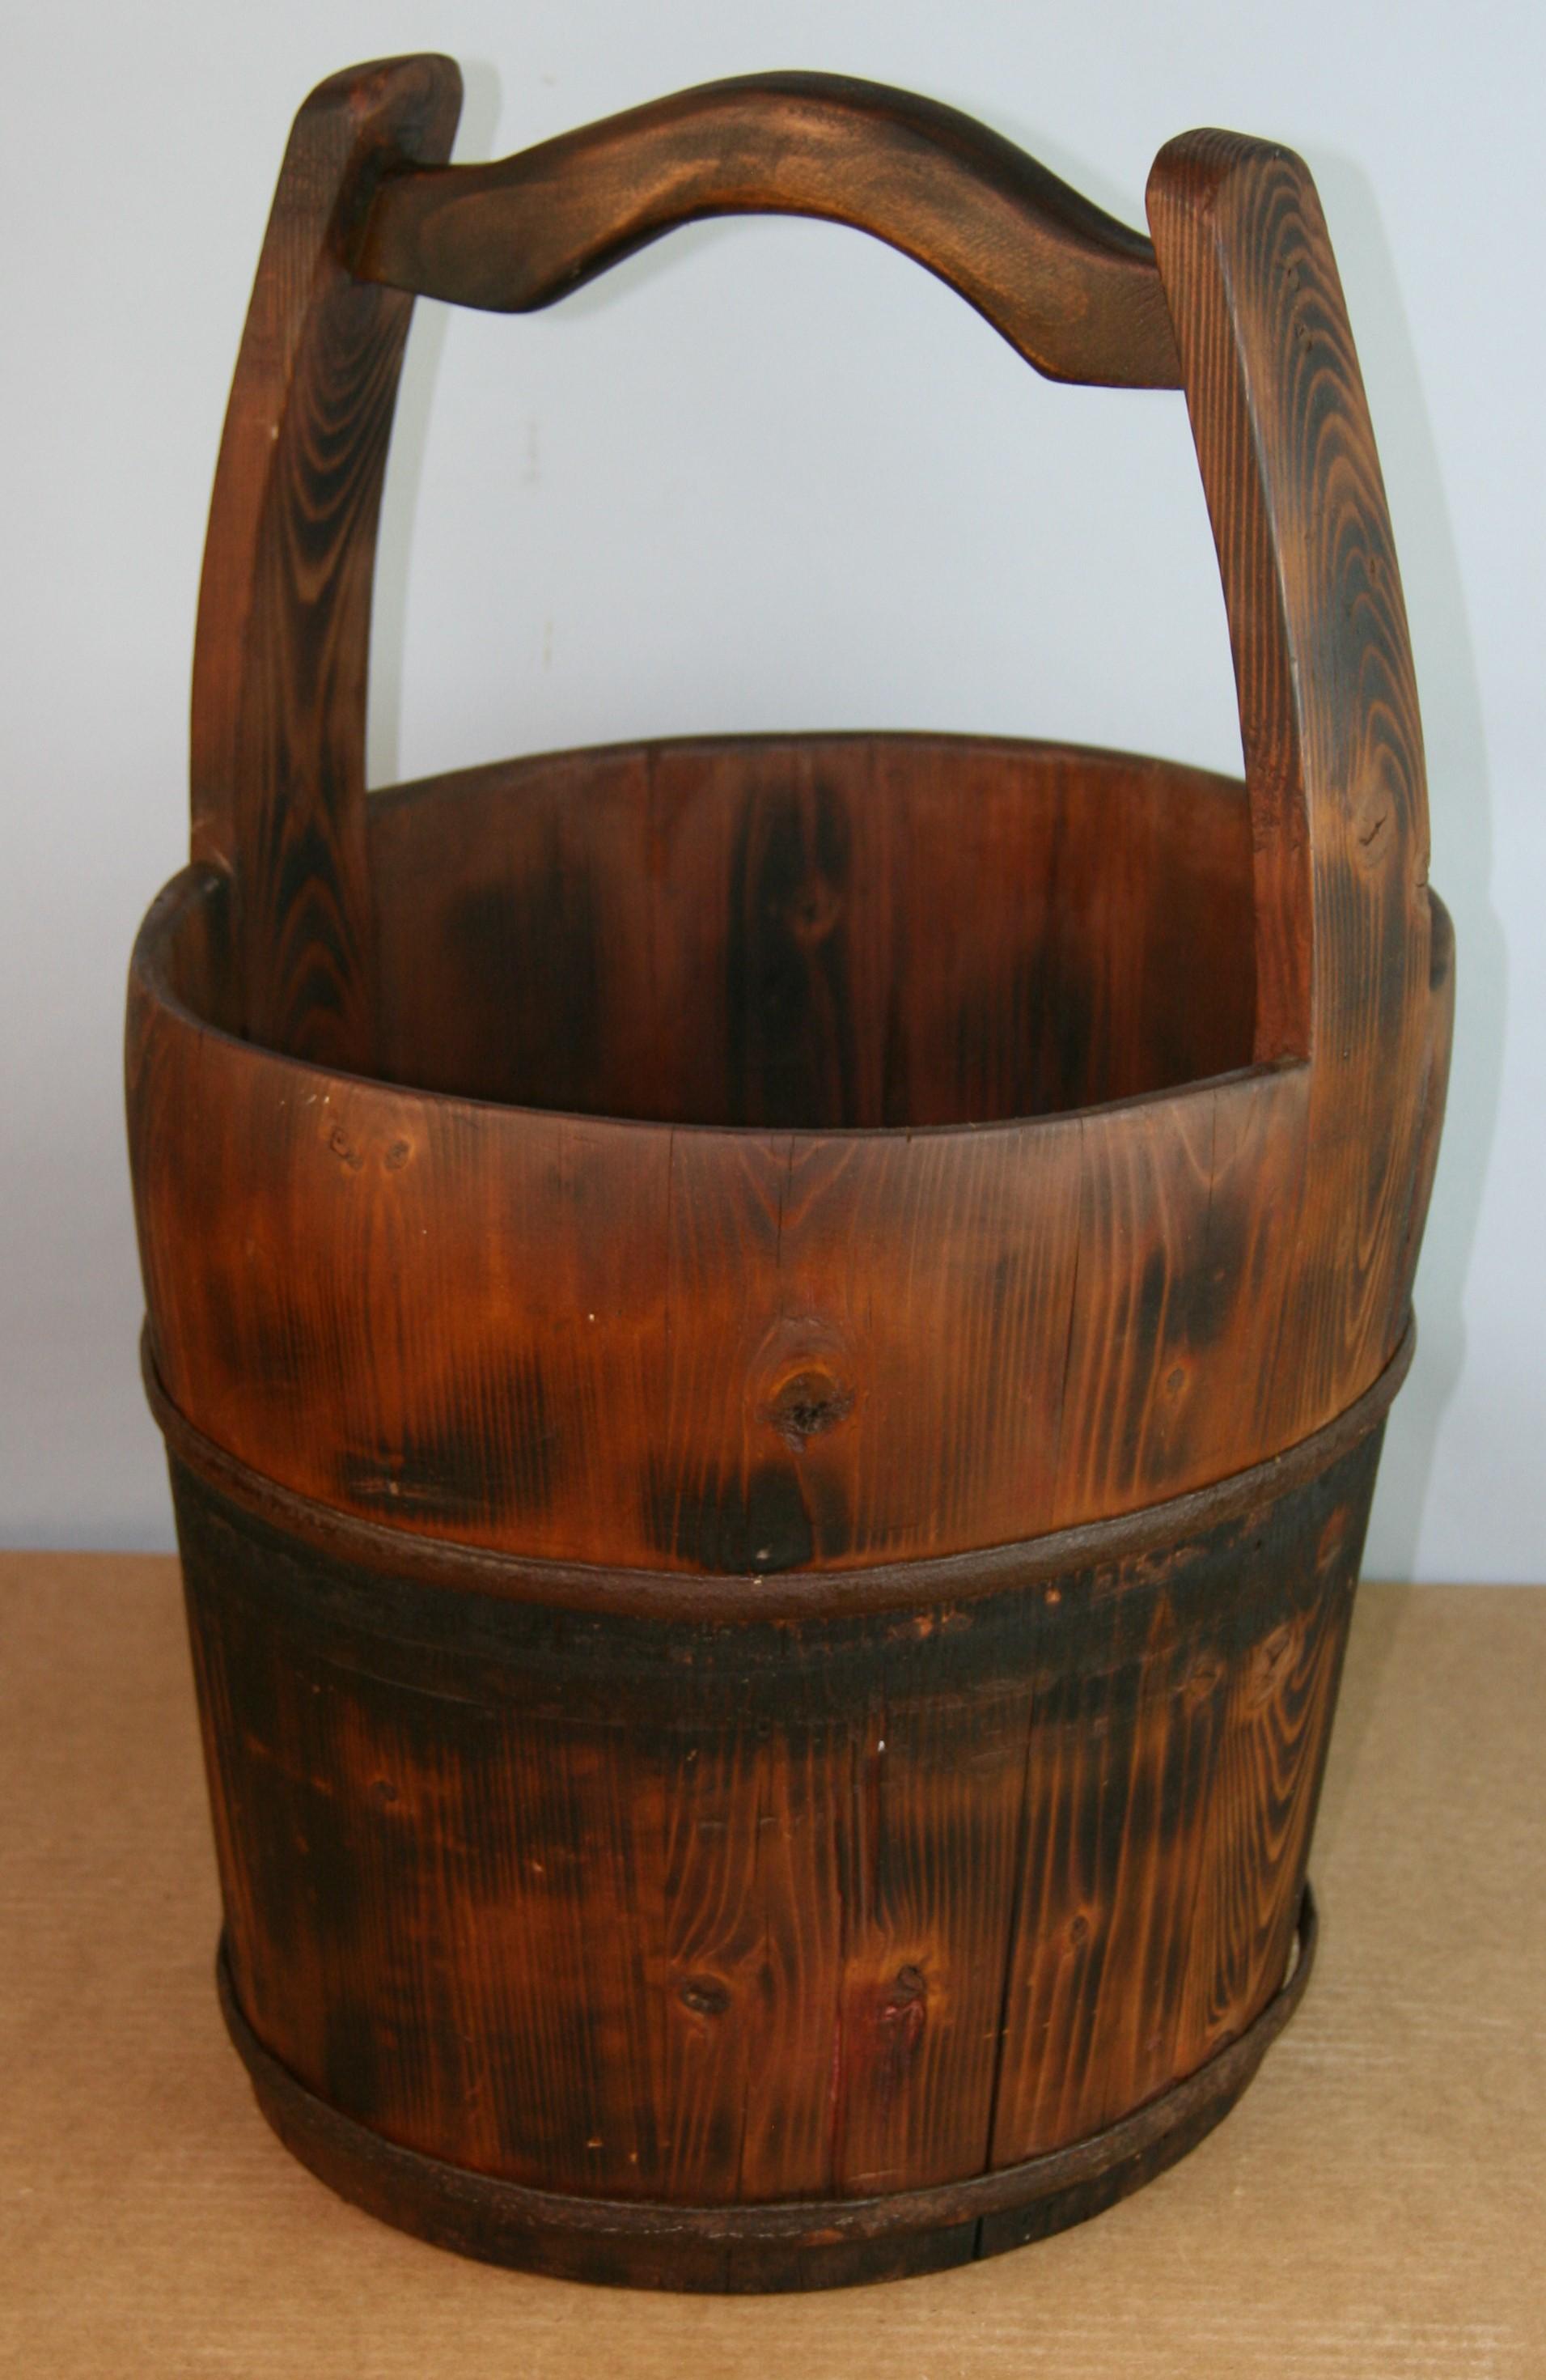 3-1070 Cedar bucket with metal banding. Can be used as planter.